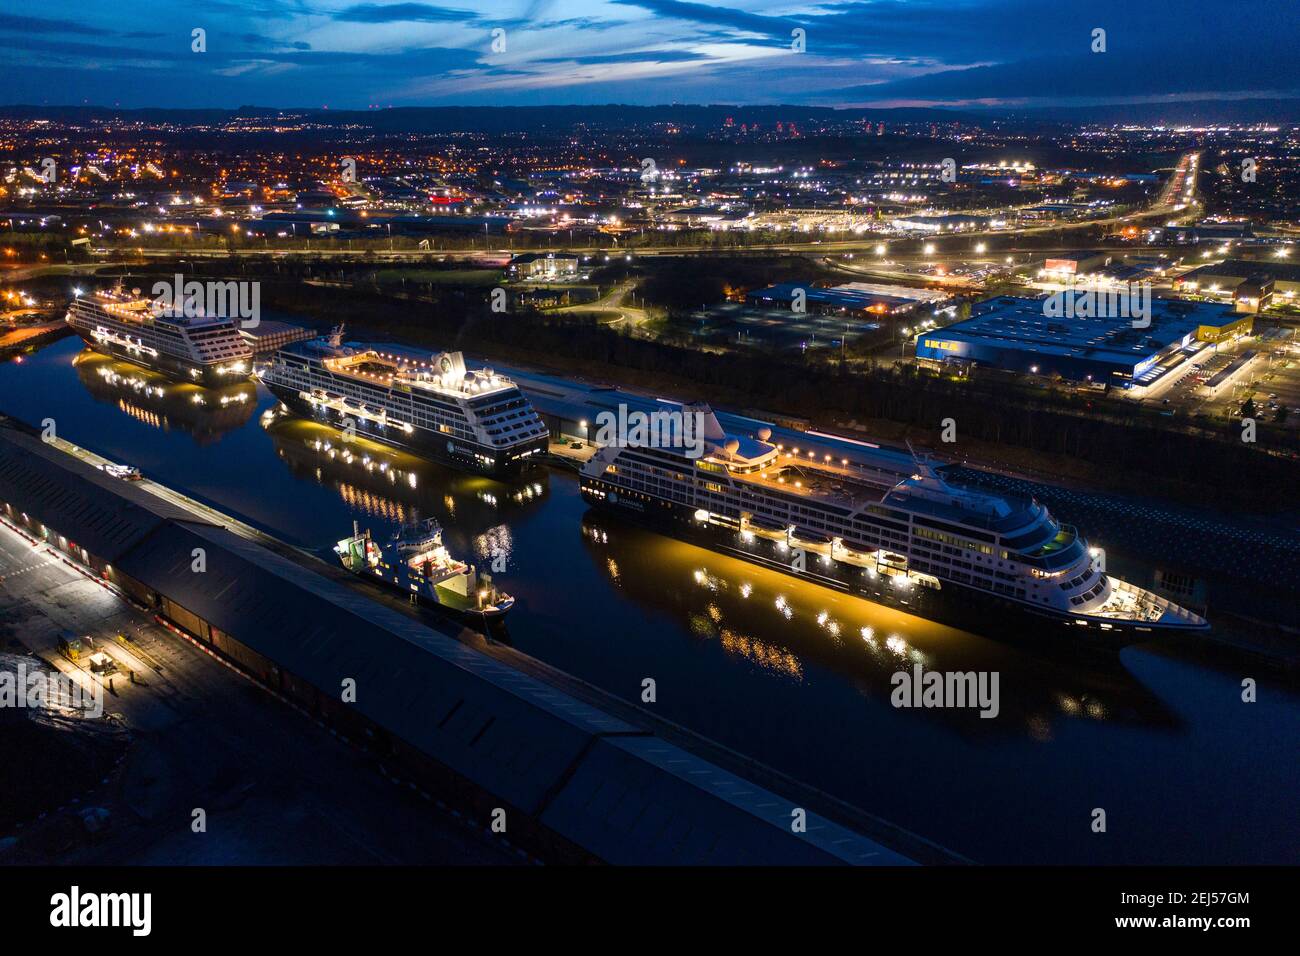 Glasgow, Scotland, UK. 21st Feb, 2021. Pictured: Aerial drone photography of the  three Amazara ruise ships (L-R) Amazara Pursuit; Amazara Quest; Amazara Journey, seen with their lights, have been berthed King George V Dock since the start of the coronavirus (COVID19) lockdown early last year. The evening skyline of Paisley and Glasgow Airport are visible with the M8 motorway. Credit: Colin Fisher/Alamy Live News Stock Photo